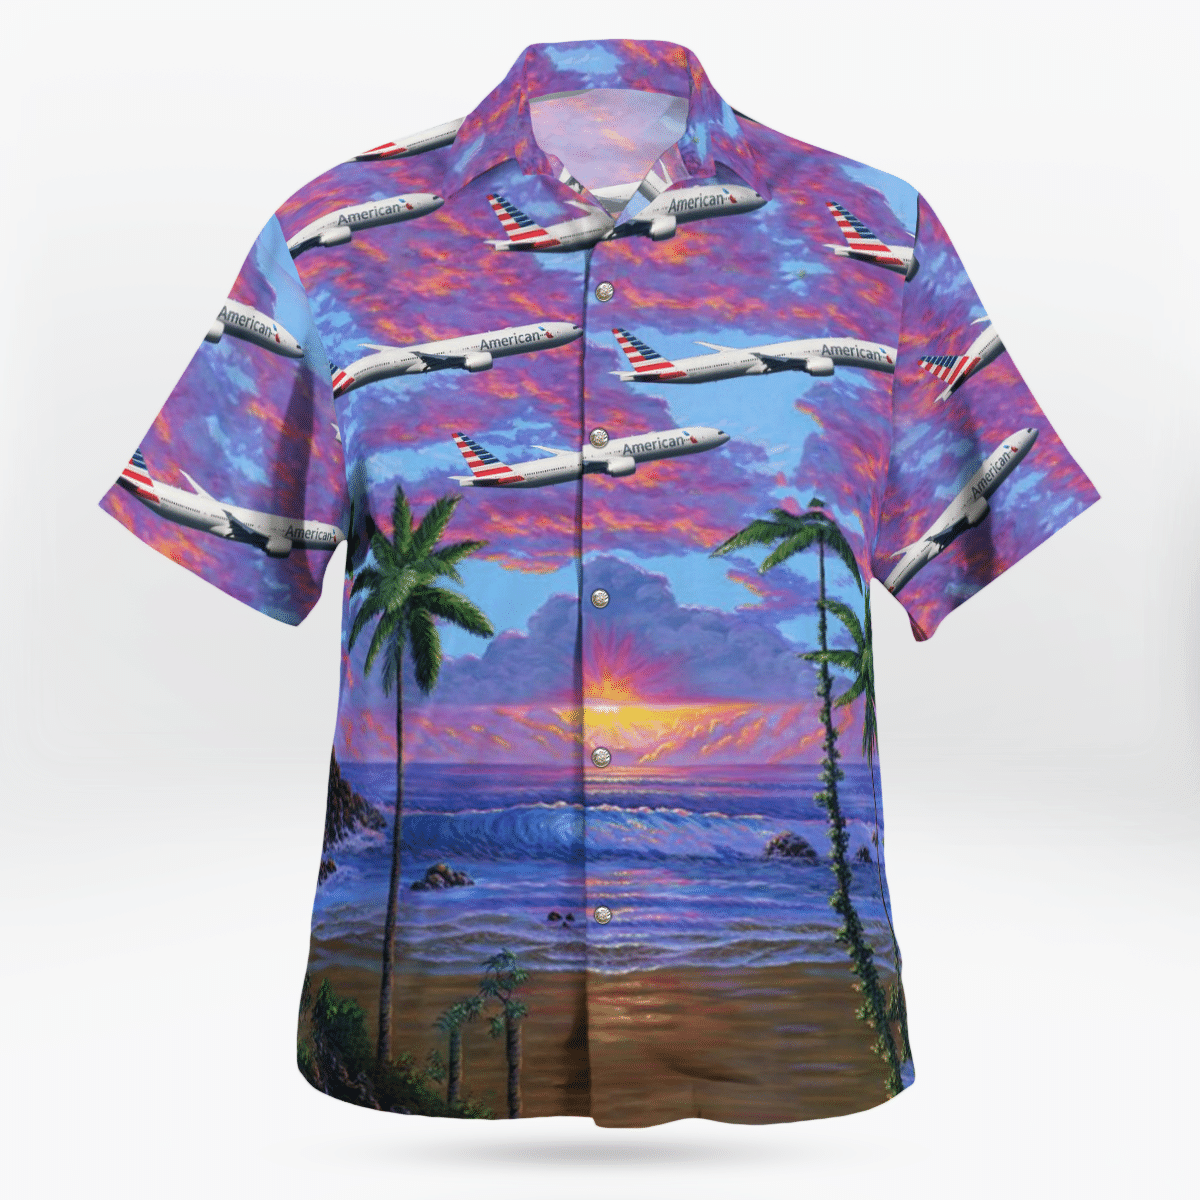 NEW American Airlines Boeing 777-323ER Hawaii Shirt2